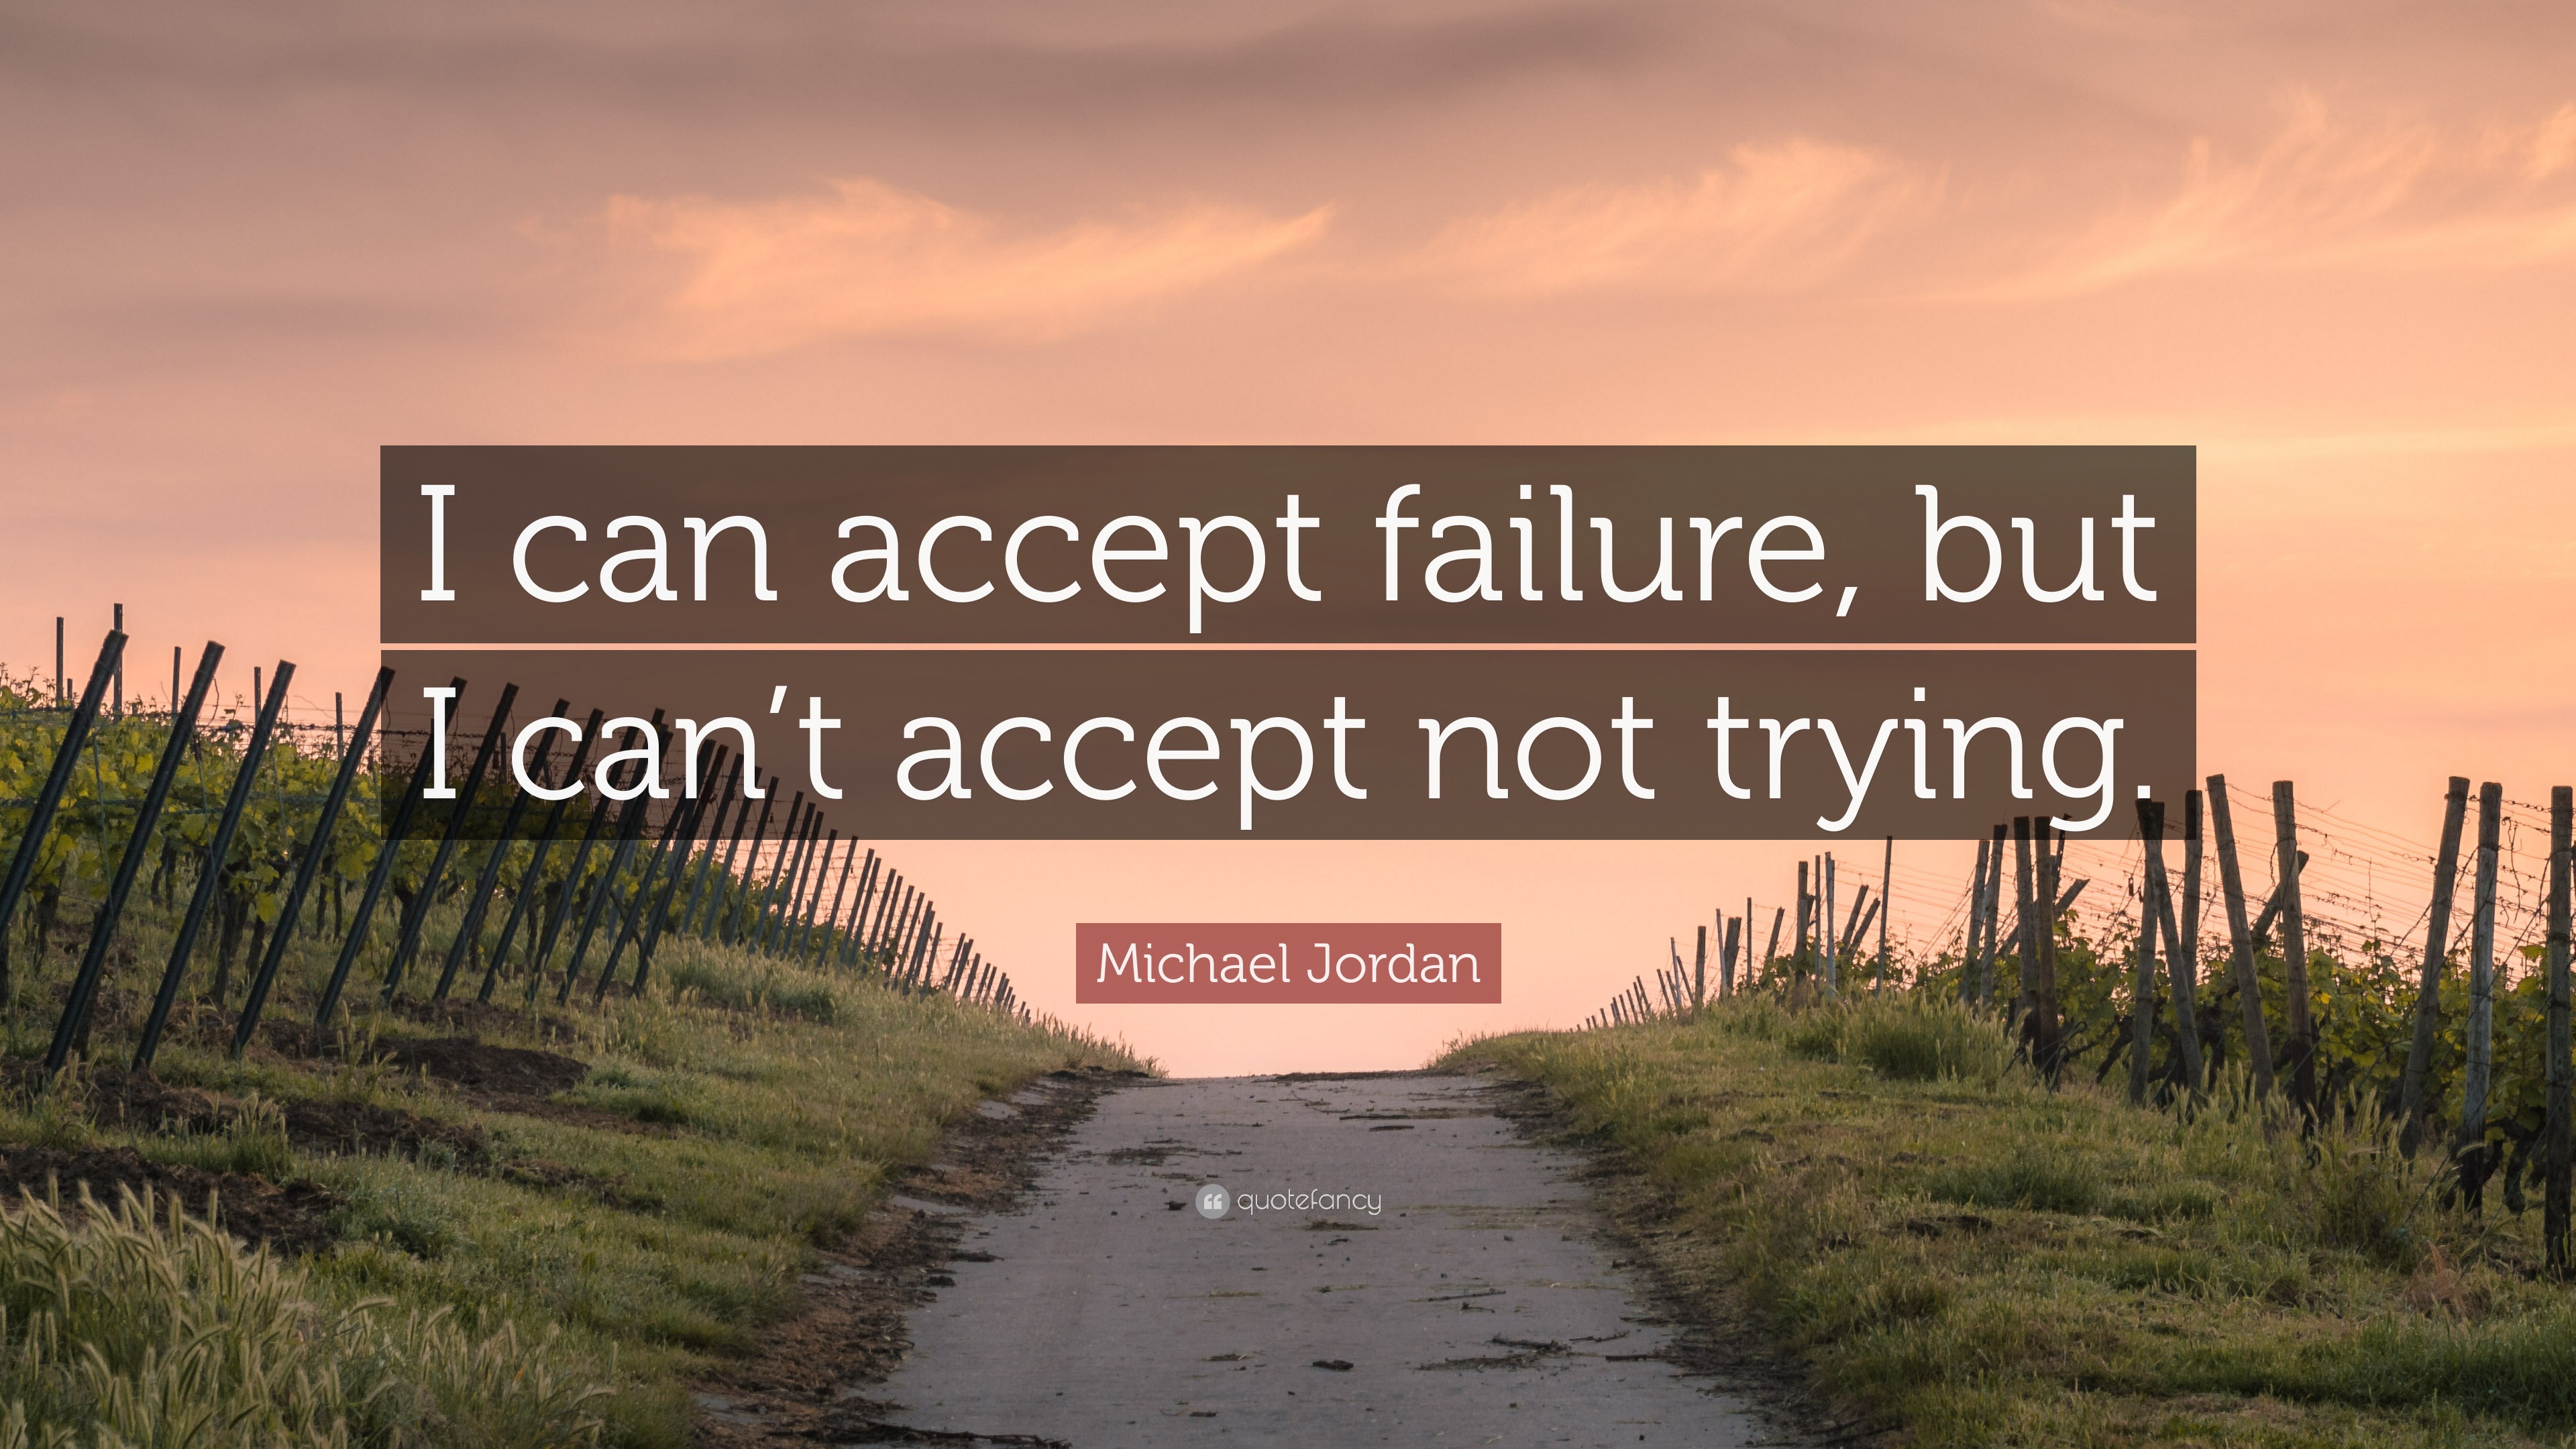 Michael Jordan Quote: “I can accept failure, but I can’t accept not ...